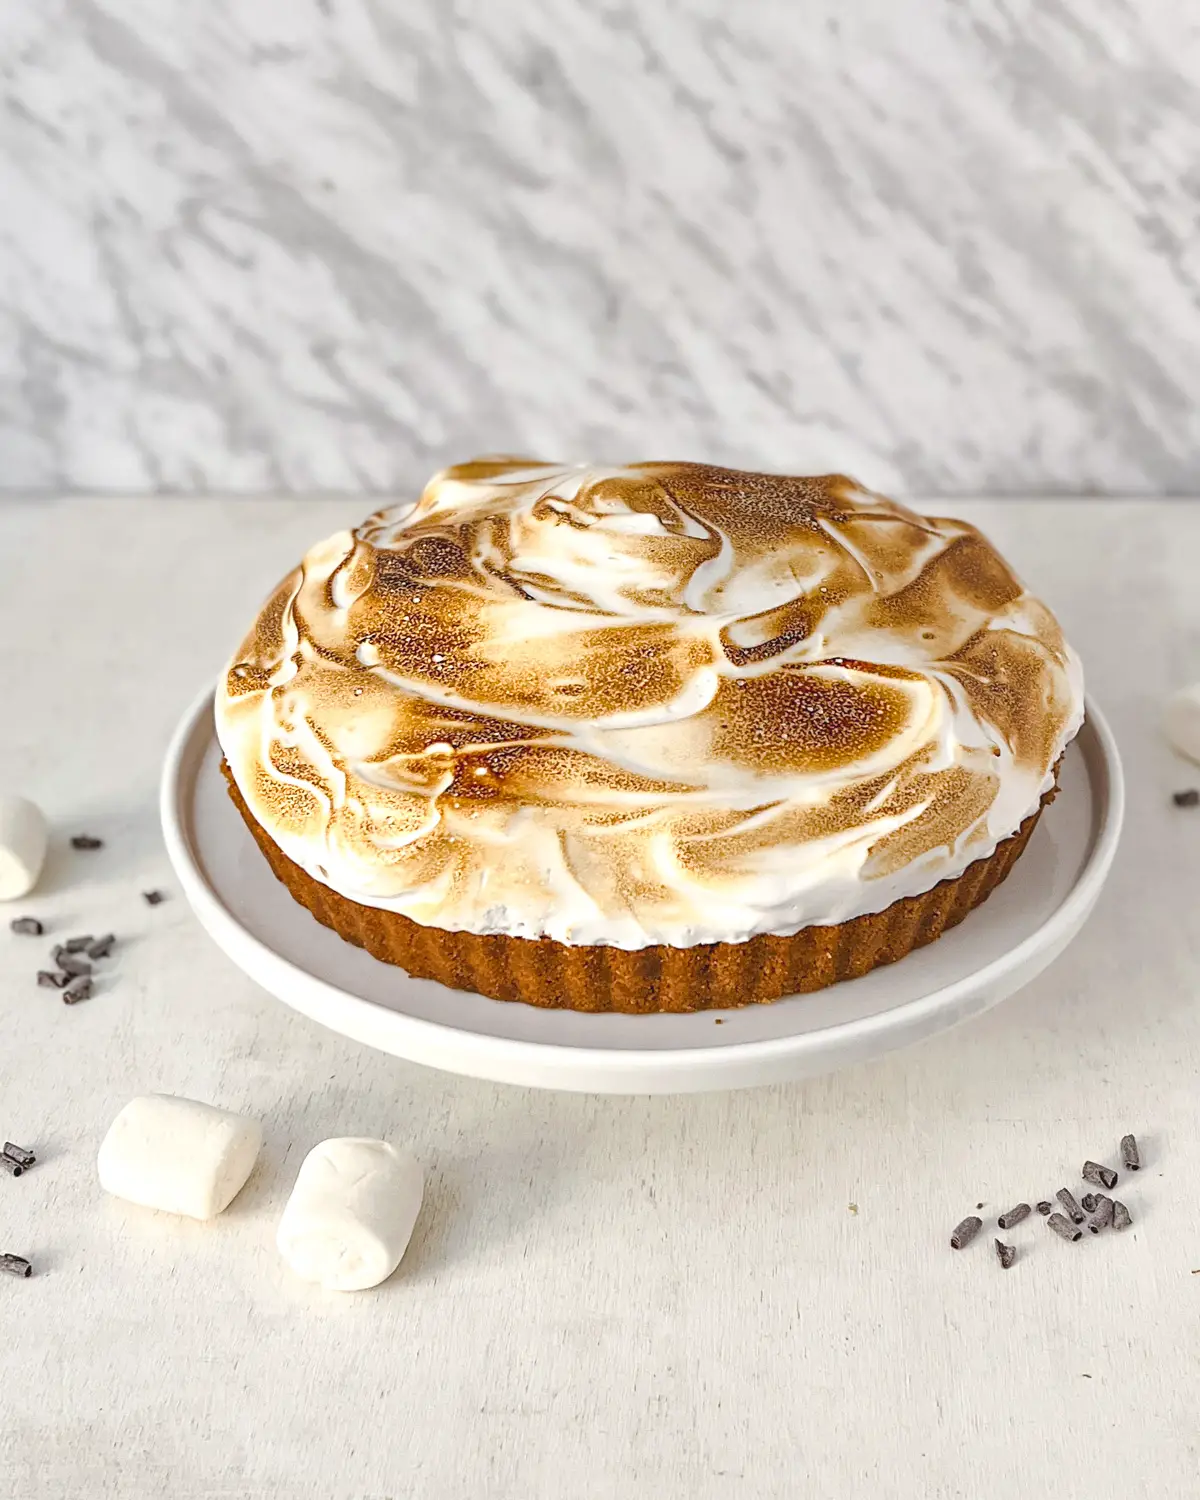 Vegan s'more tart with chocolate ganache and toasted marshmallow topping.